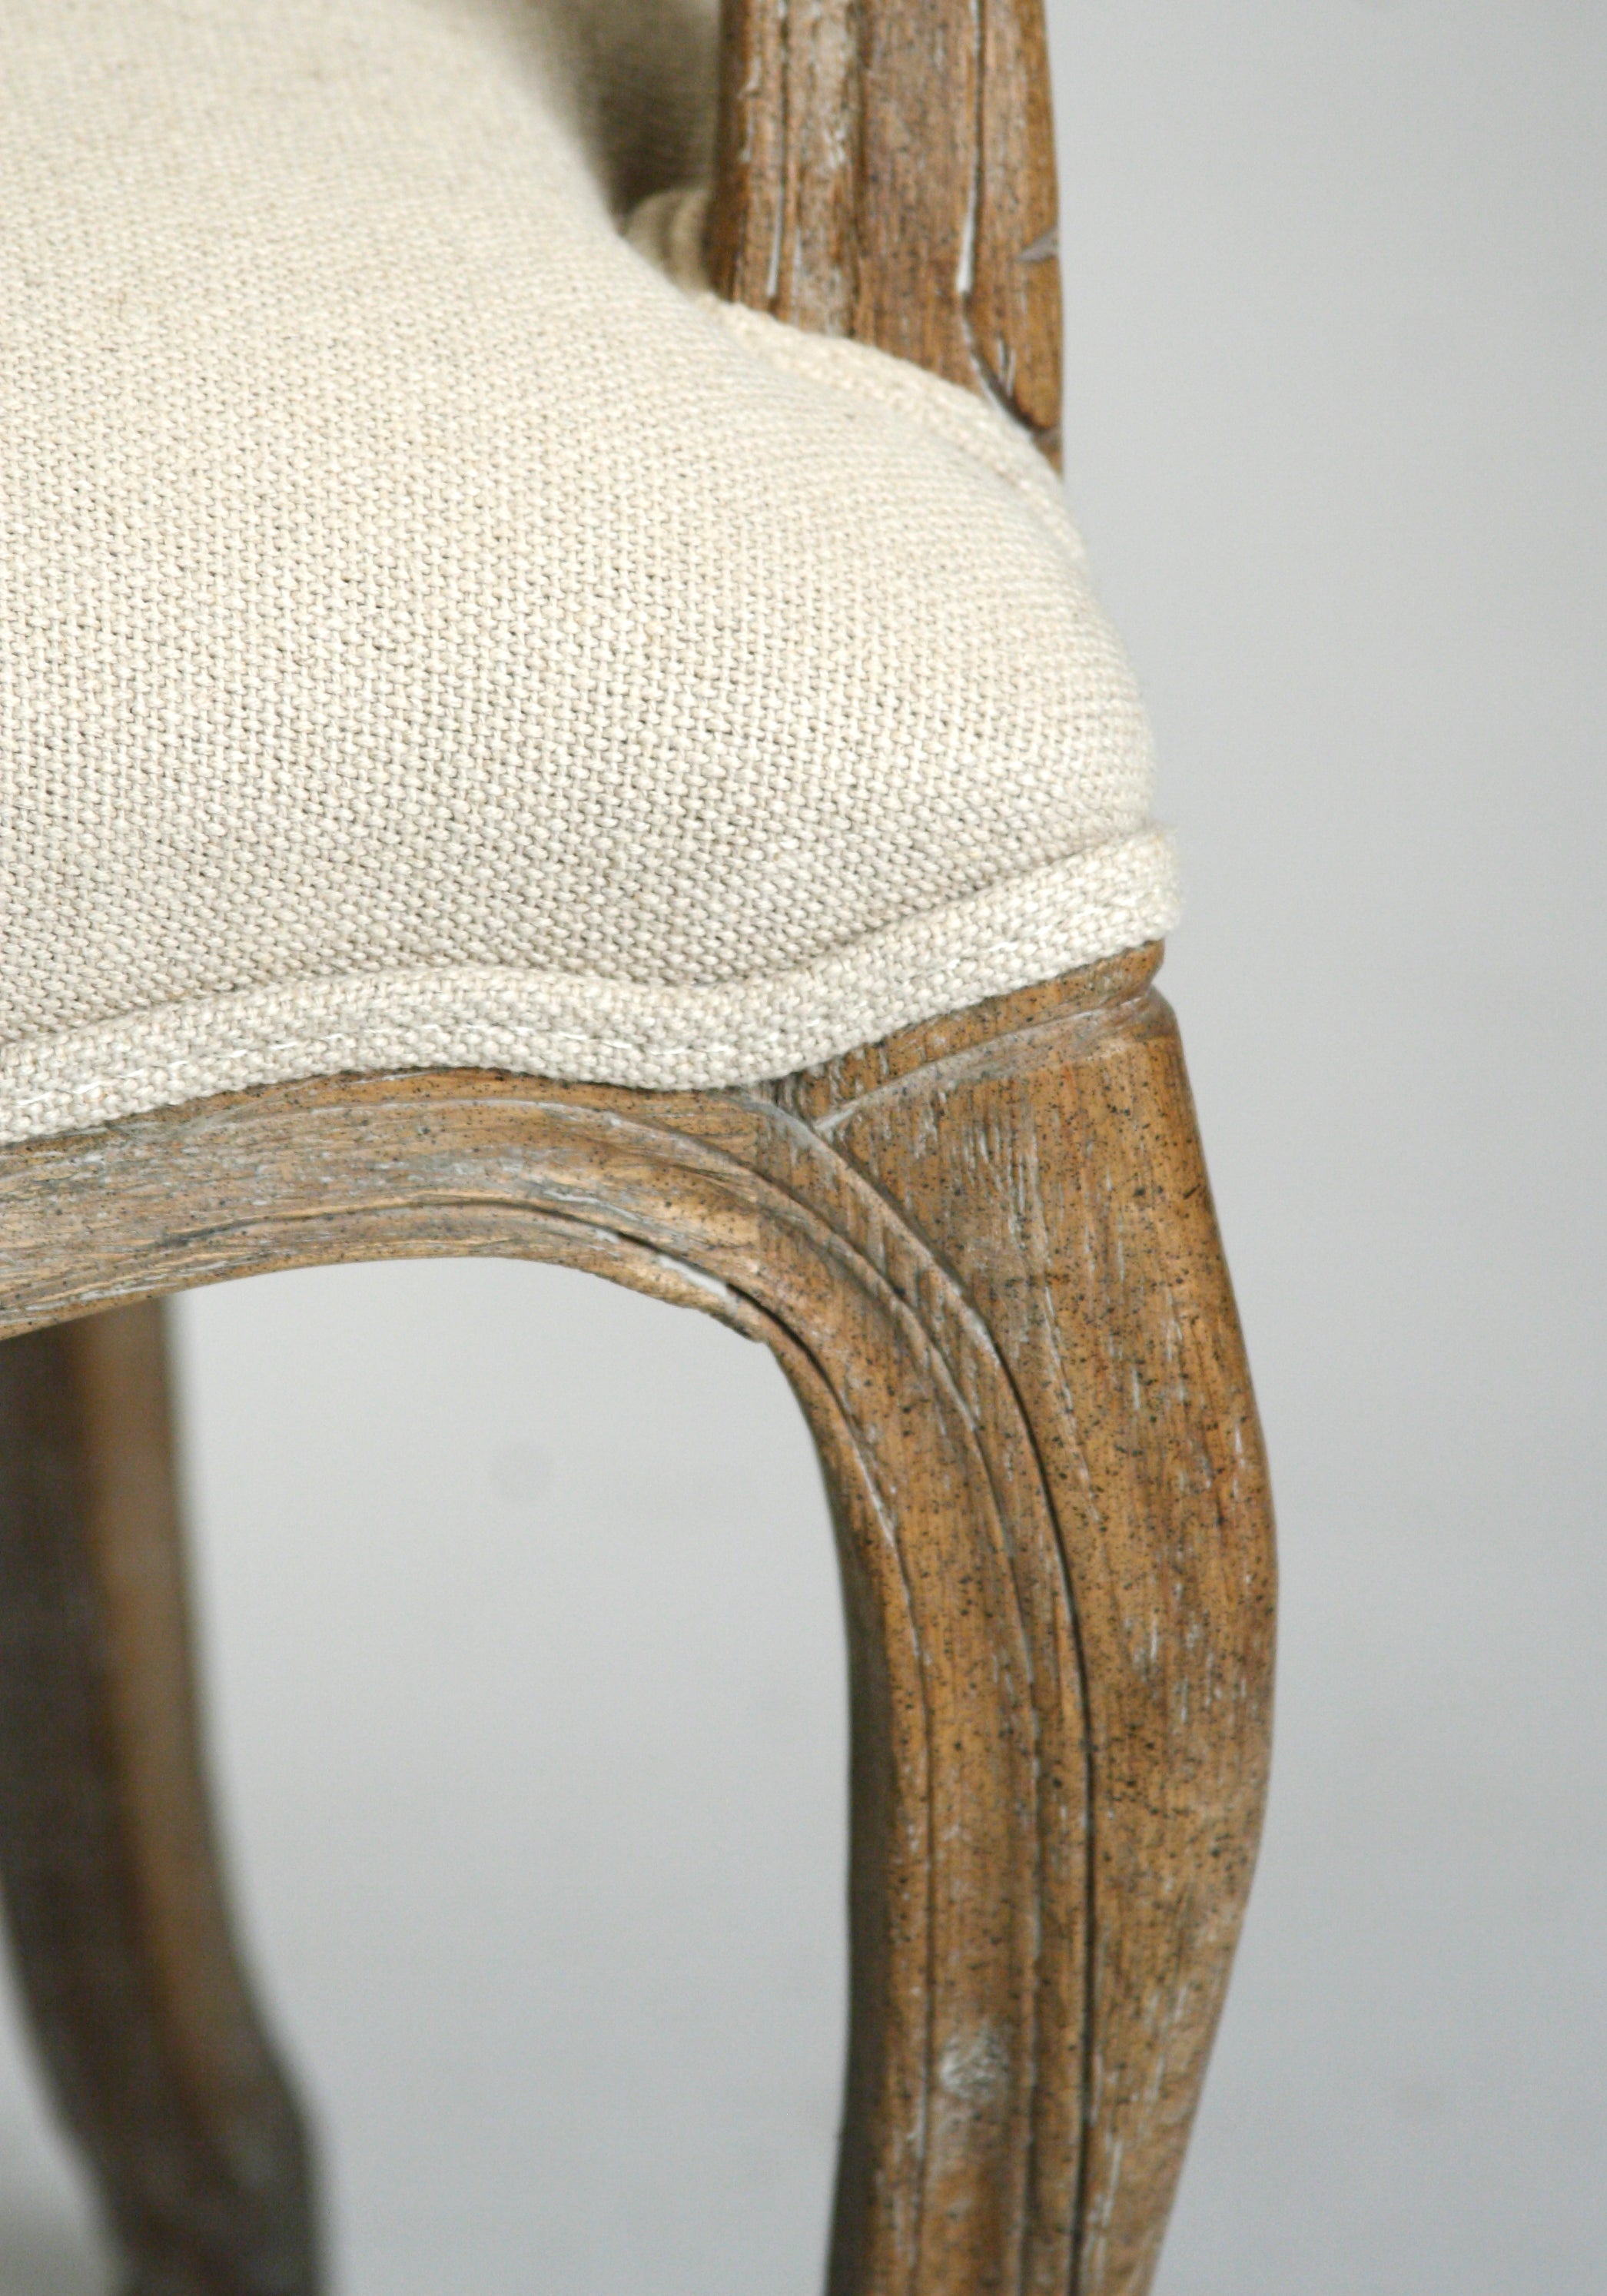 Zentique Louis Arm Chair with Caned Back